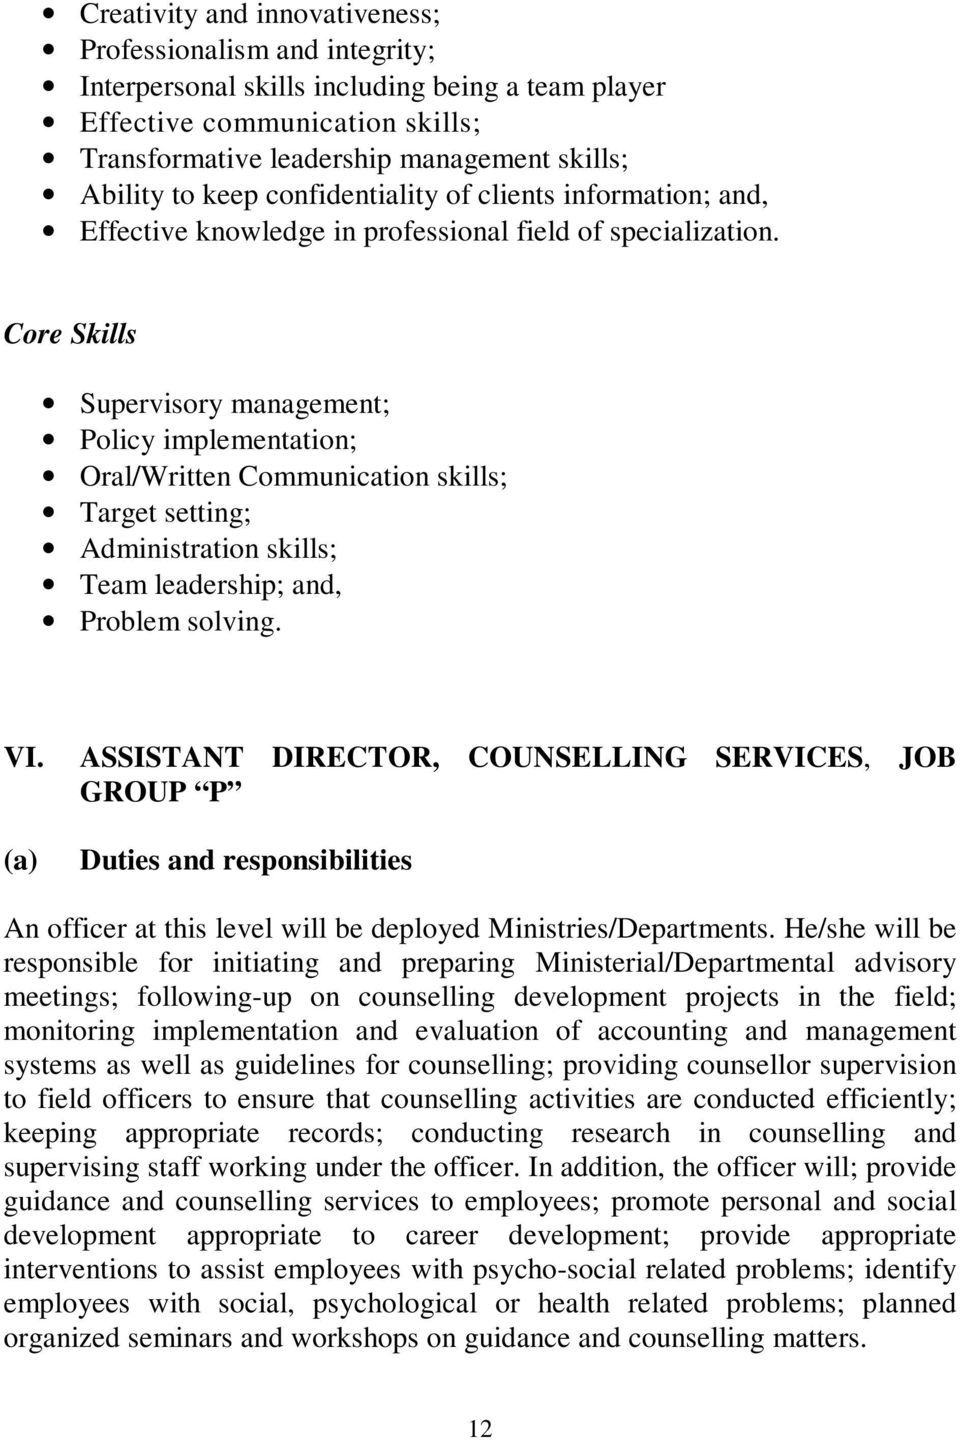 Core Skills Supervisory management; Policy implementation; Oral/Written Communication skills; Target setting; Administration skills; Team leadership; and, Problem solving. VI.